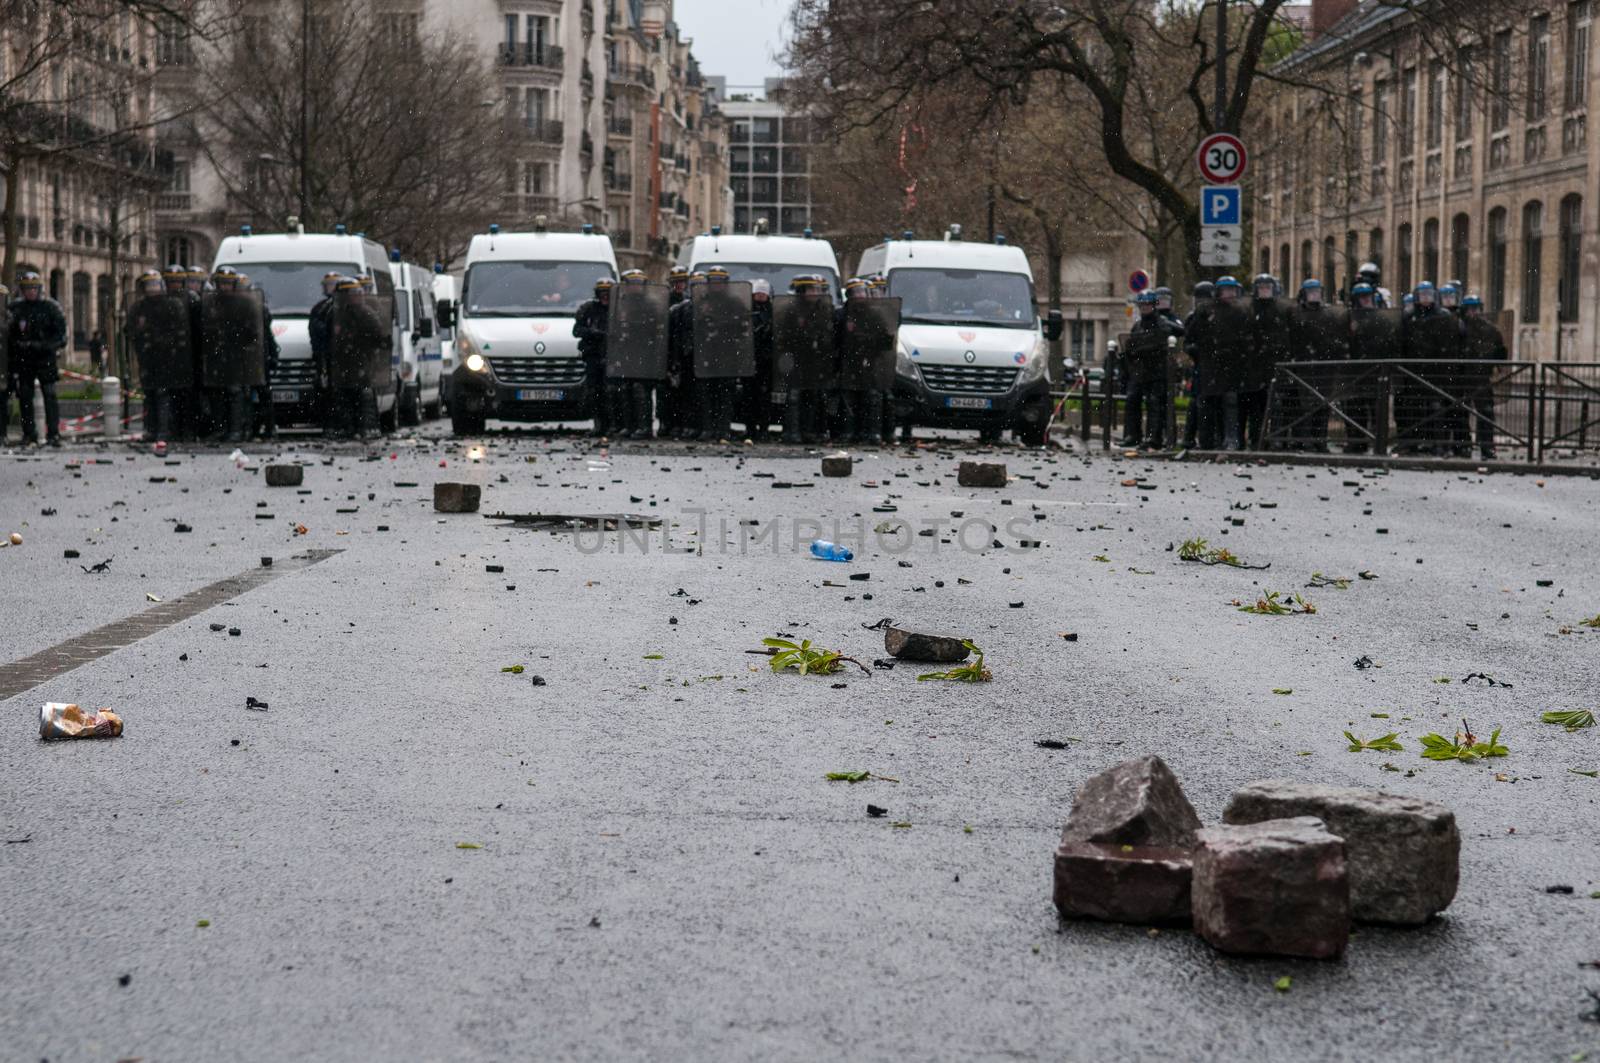 FRANCE, Paris: Stones are pictured on the ground after clashes during a demonstration against labour reform in Paris on April 9, 2016.